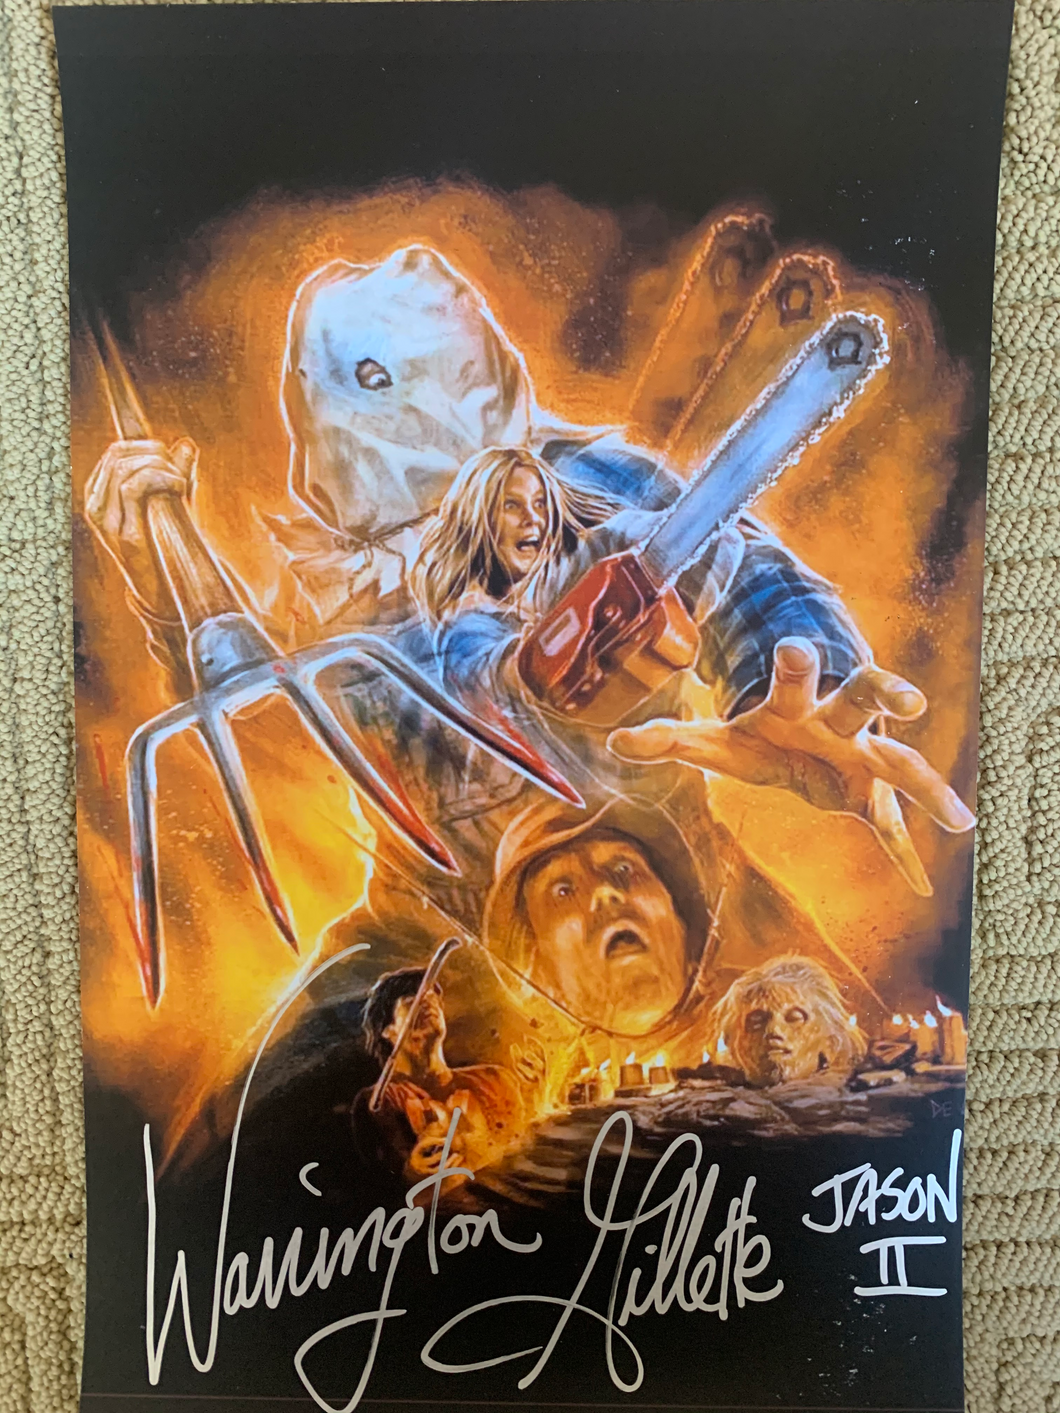 Friday The 13th Part 2 signed Warrington Gillette 11x17 poster